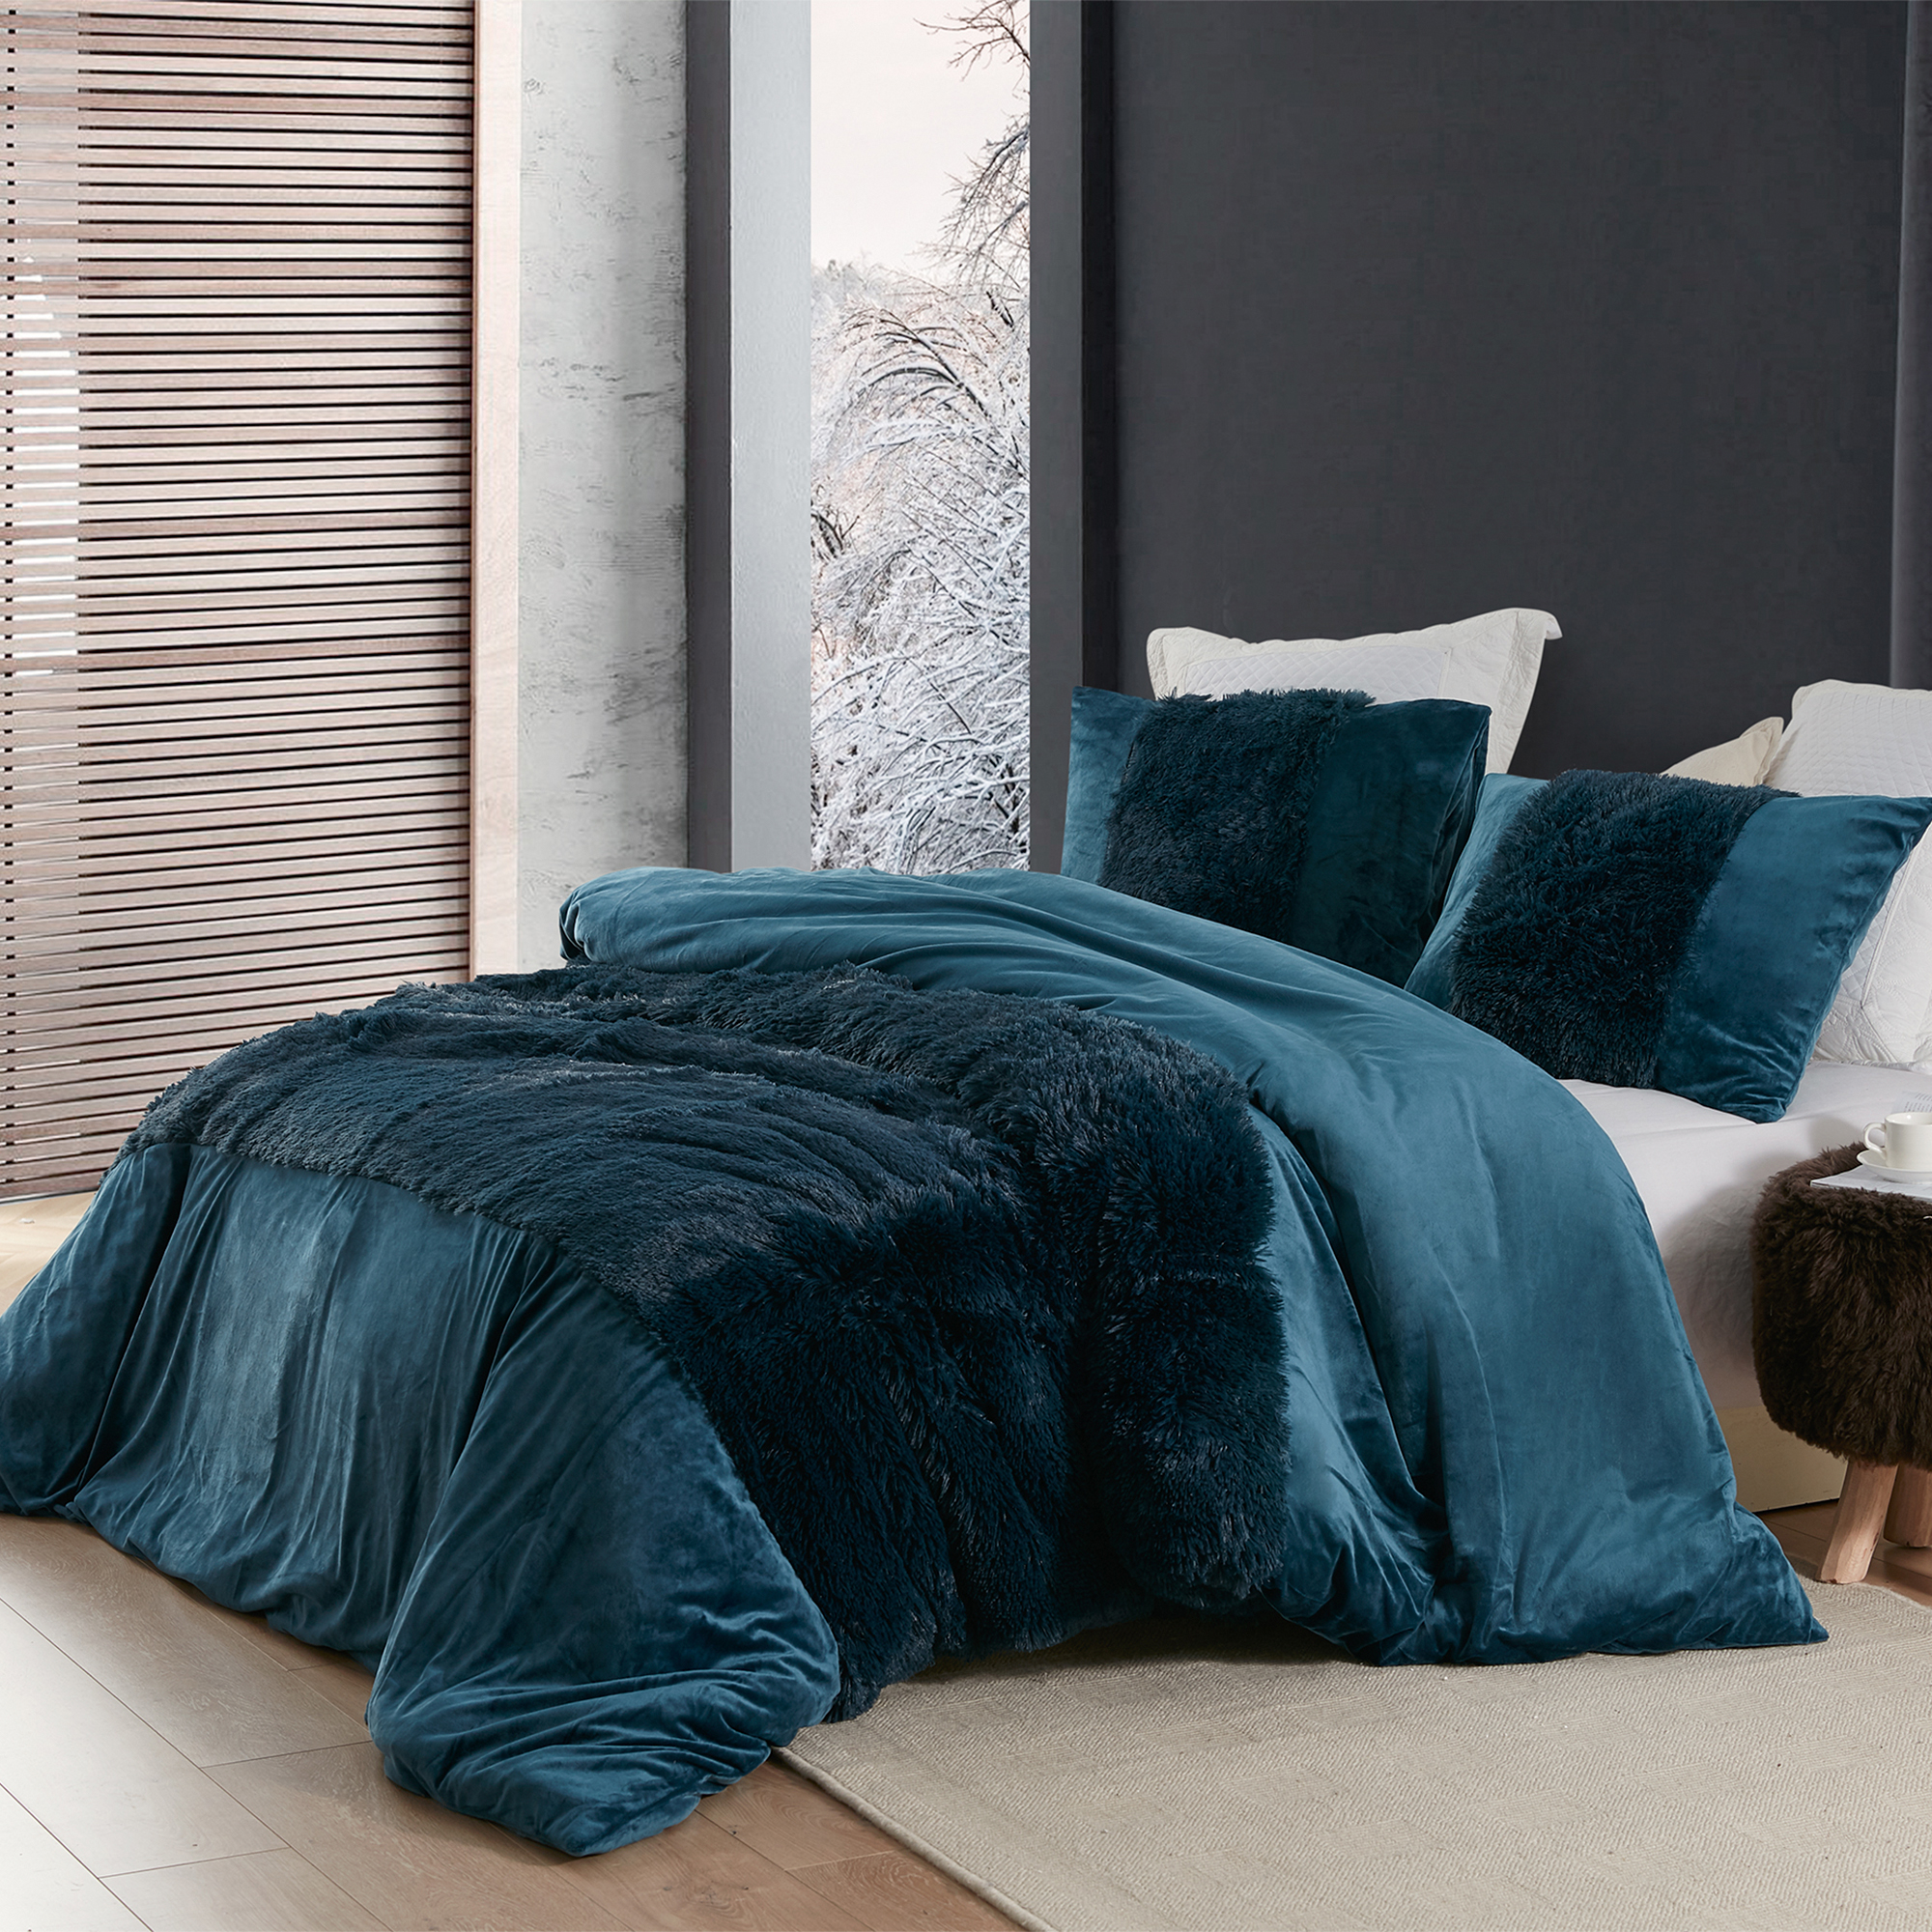 Coma Inducer® Twin XL Duvet Cover - Are You Kidding? - Nightfall Navy